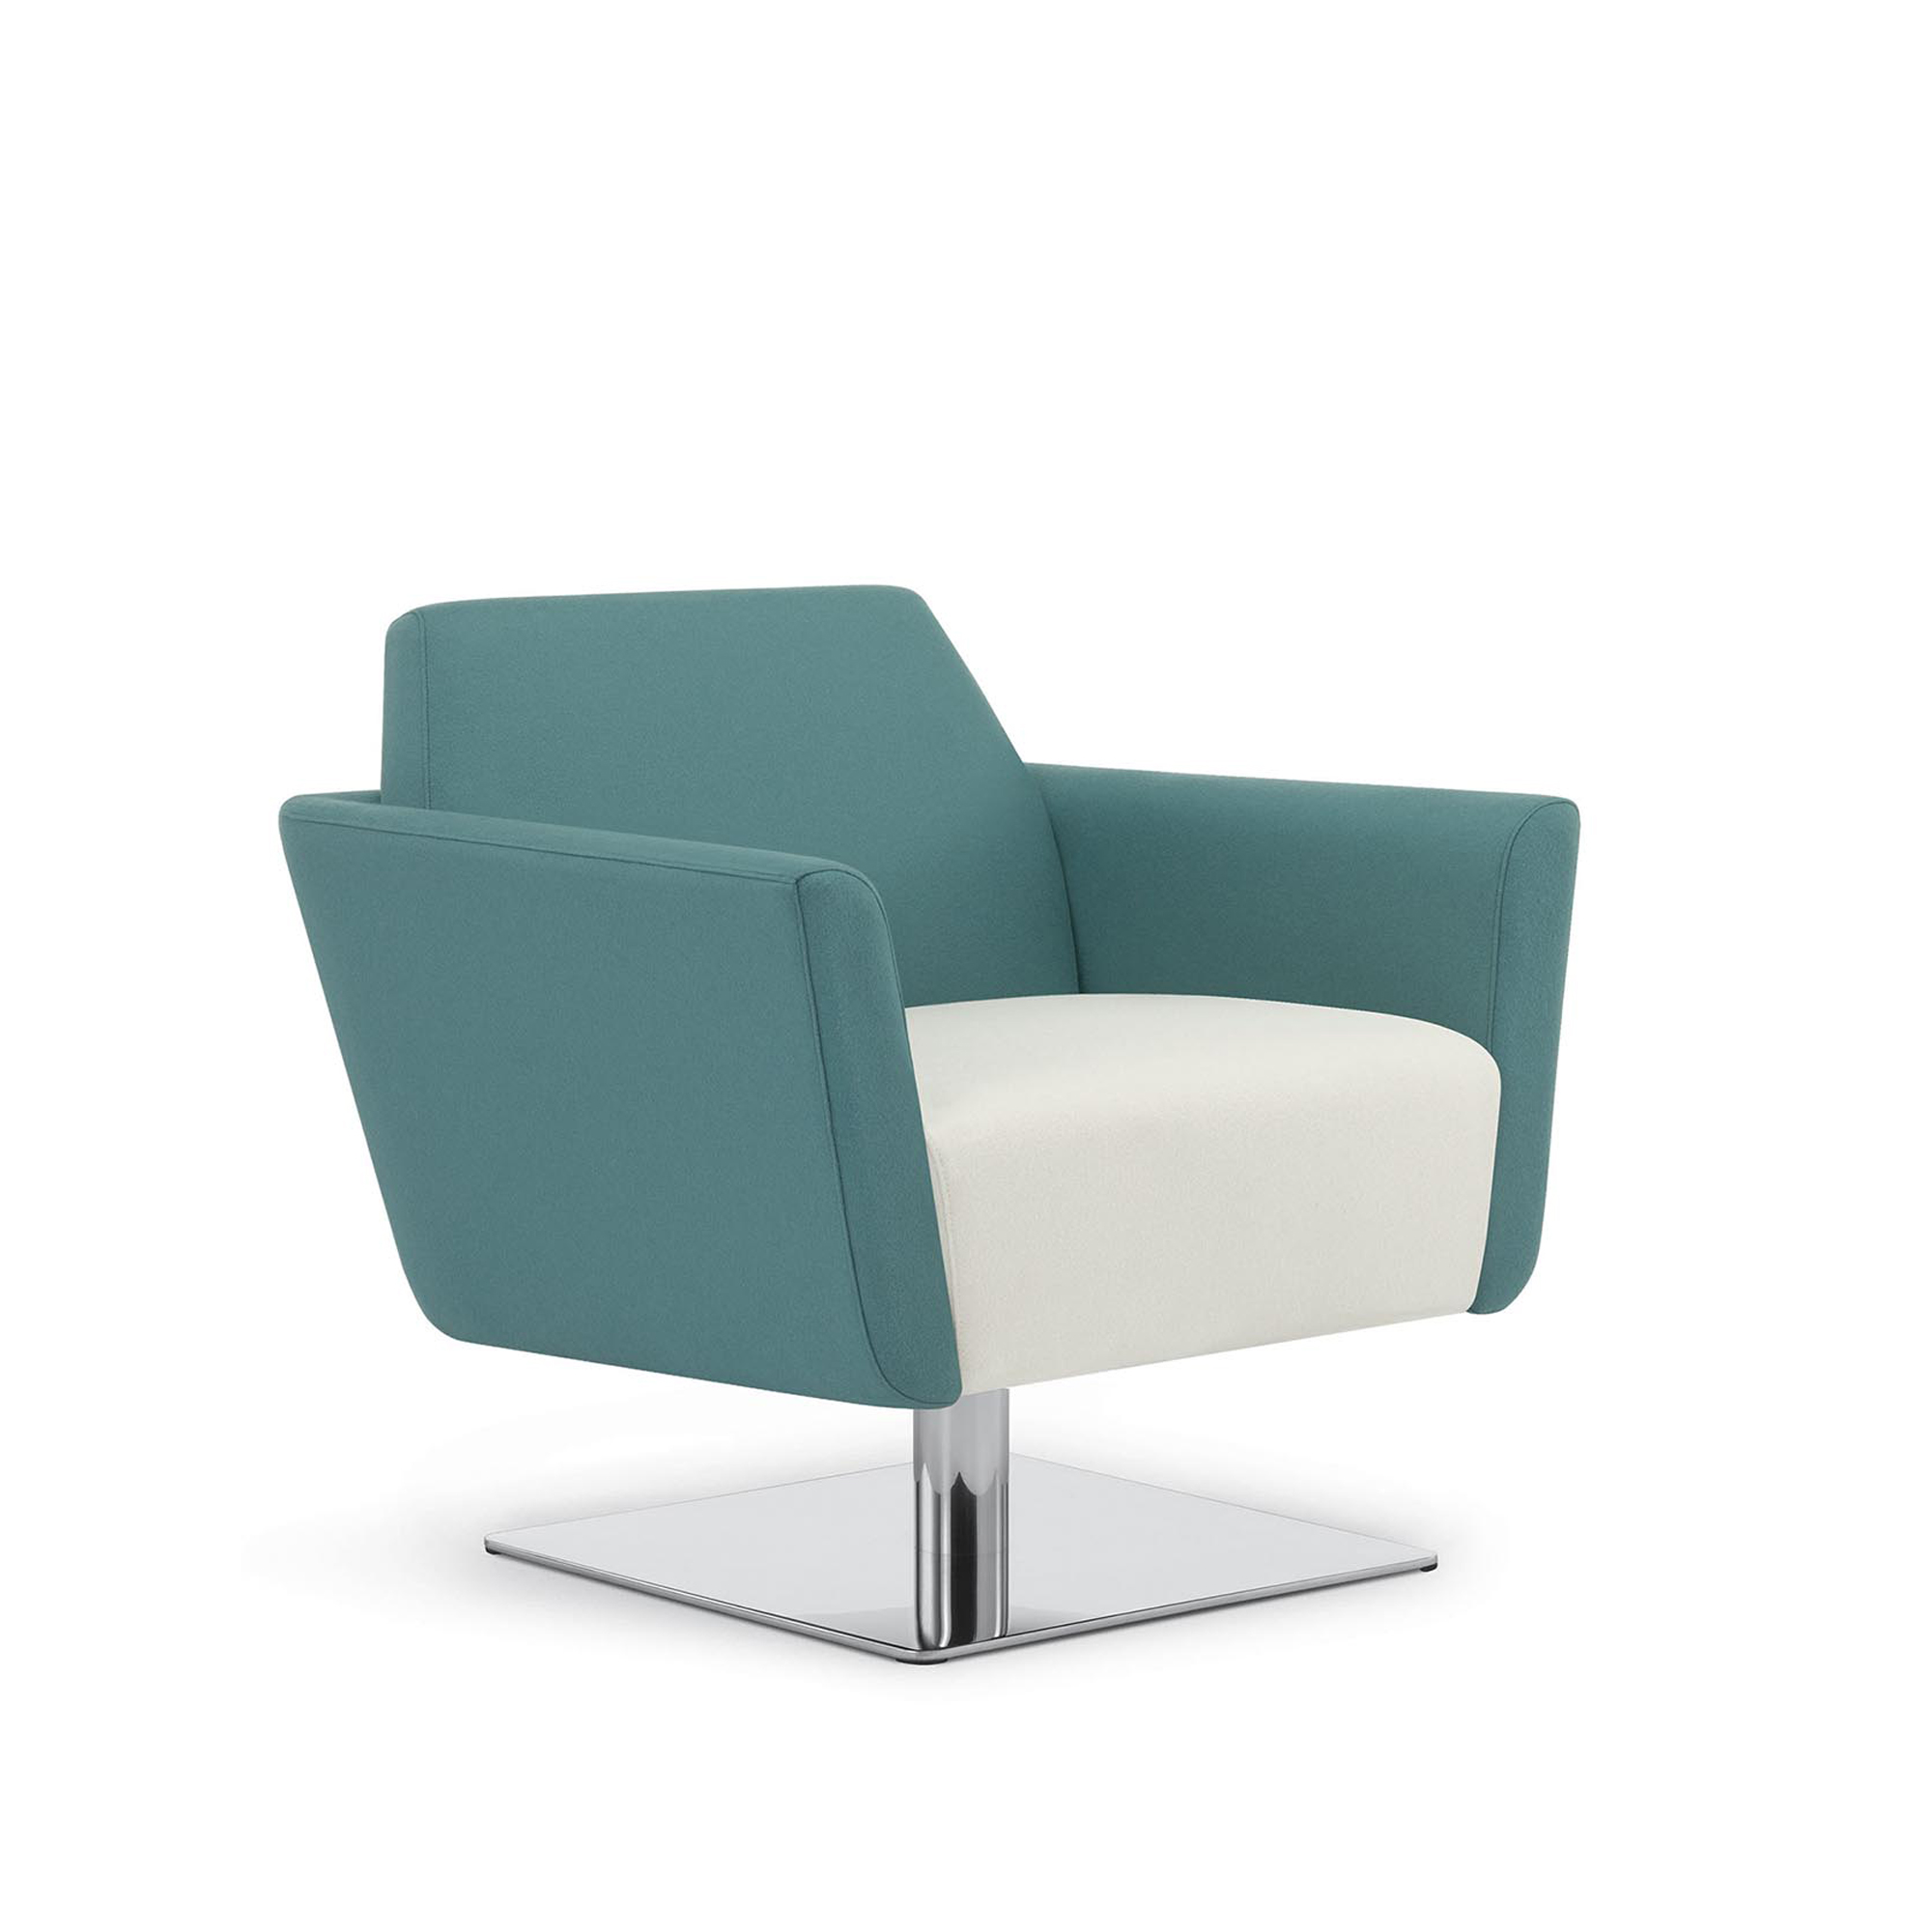 Clipse Lounge Chair with Swivel Base